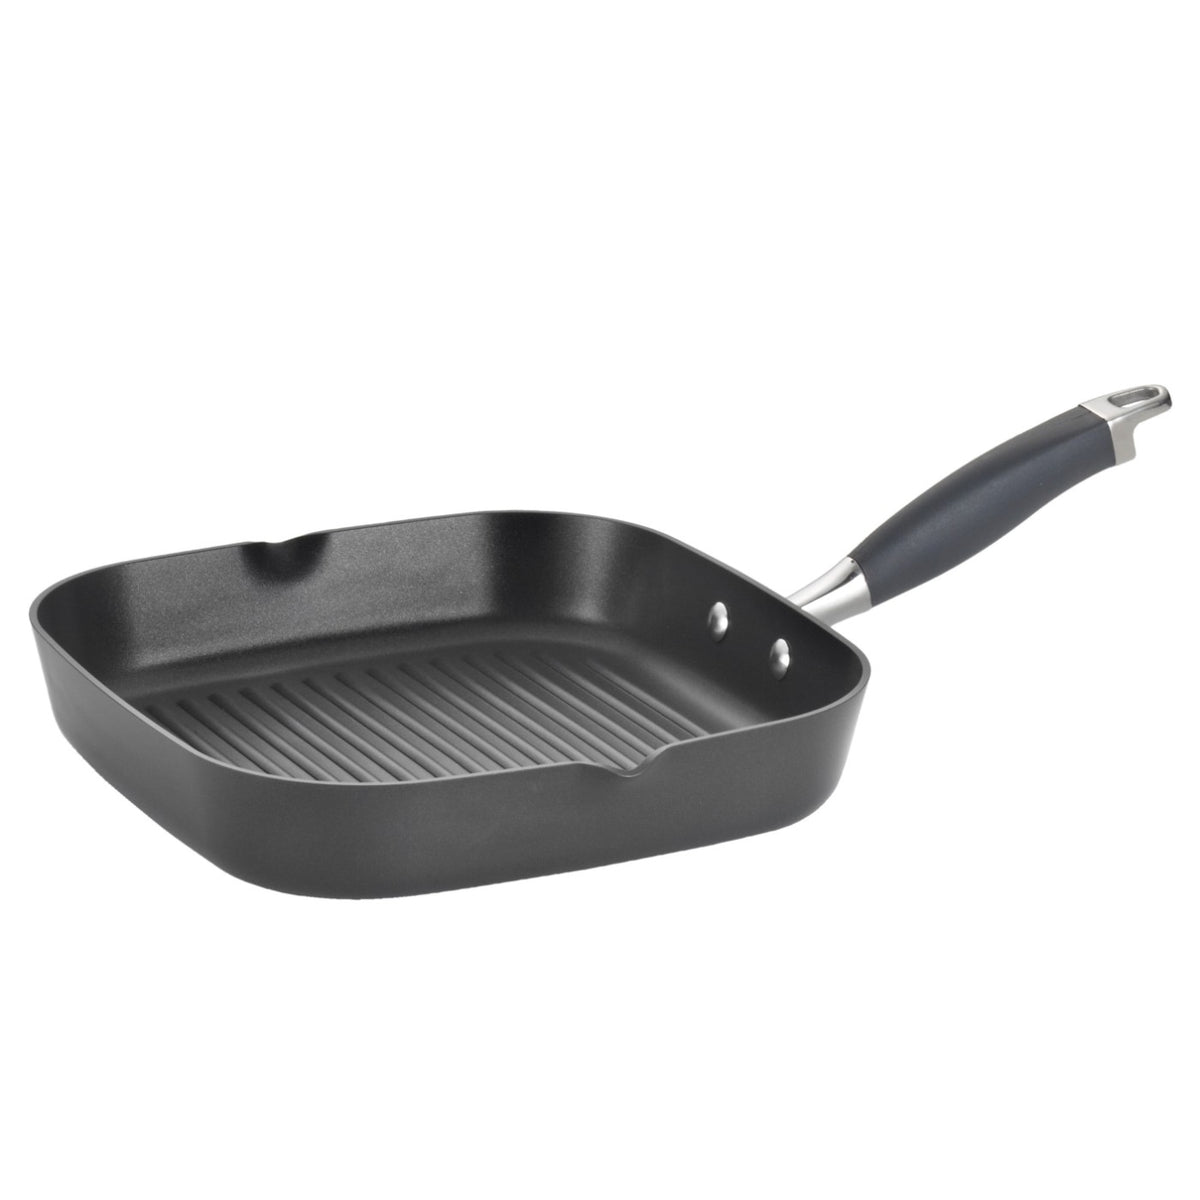 Anolon Advanced Home Hard-Anodized Nonstick Skillets (12.5-Inch Divided  Skillet, Moonstone)